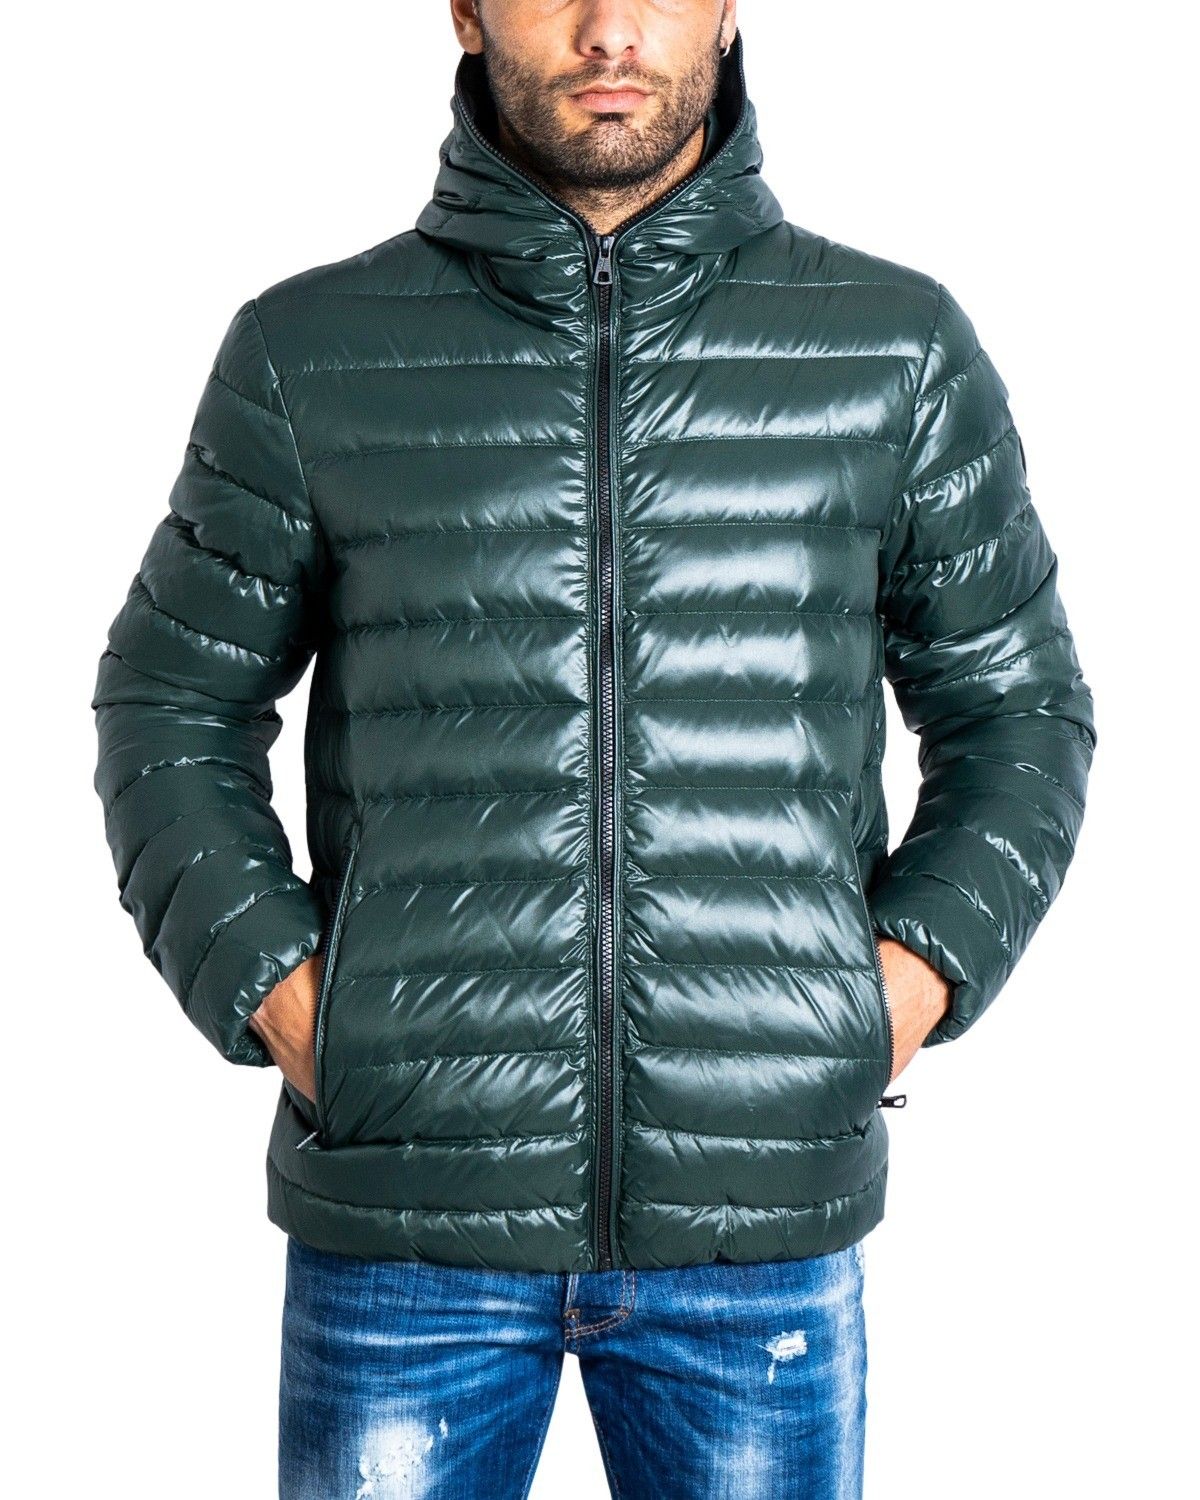 Brand: Ea7. Gender: Men. Type: Jackets. Season: Fall/Winter. PRODUCT DETAIL; Colour: green. Fastening: with zip. Sleeves: long. Collar: hood. Pockets: front pockets. COMPOSITION AND MATERIAL; Composition: -100% polyester.